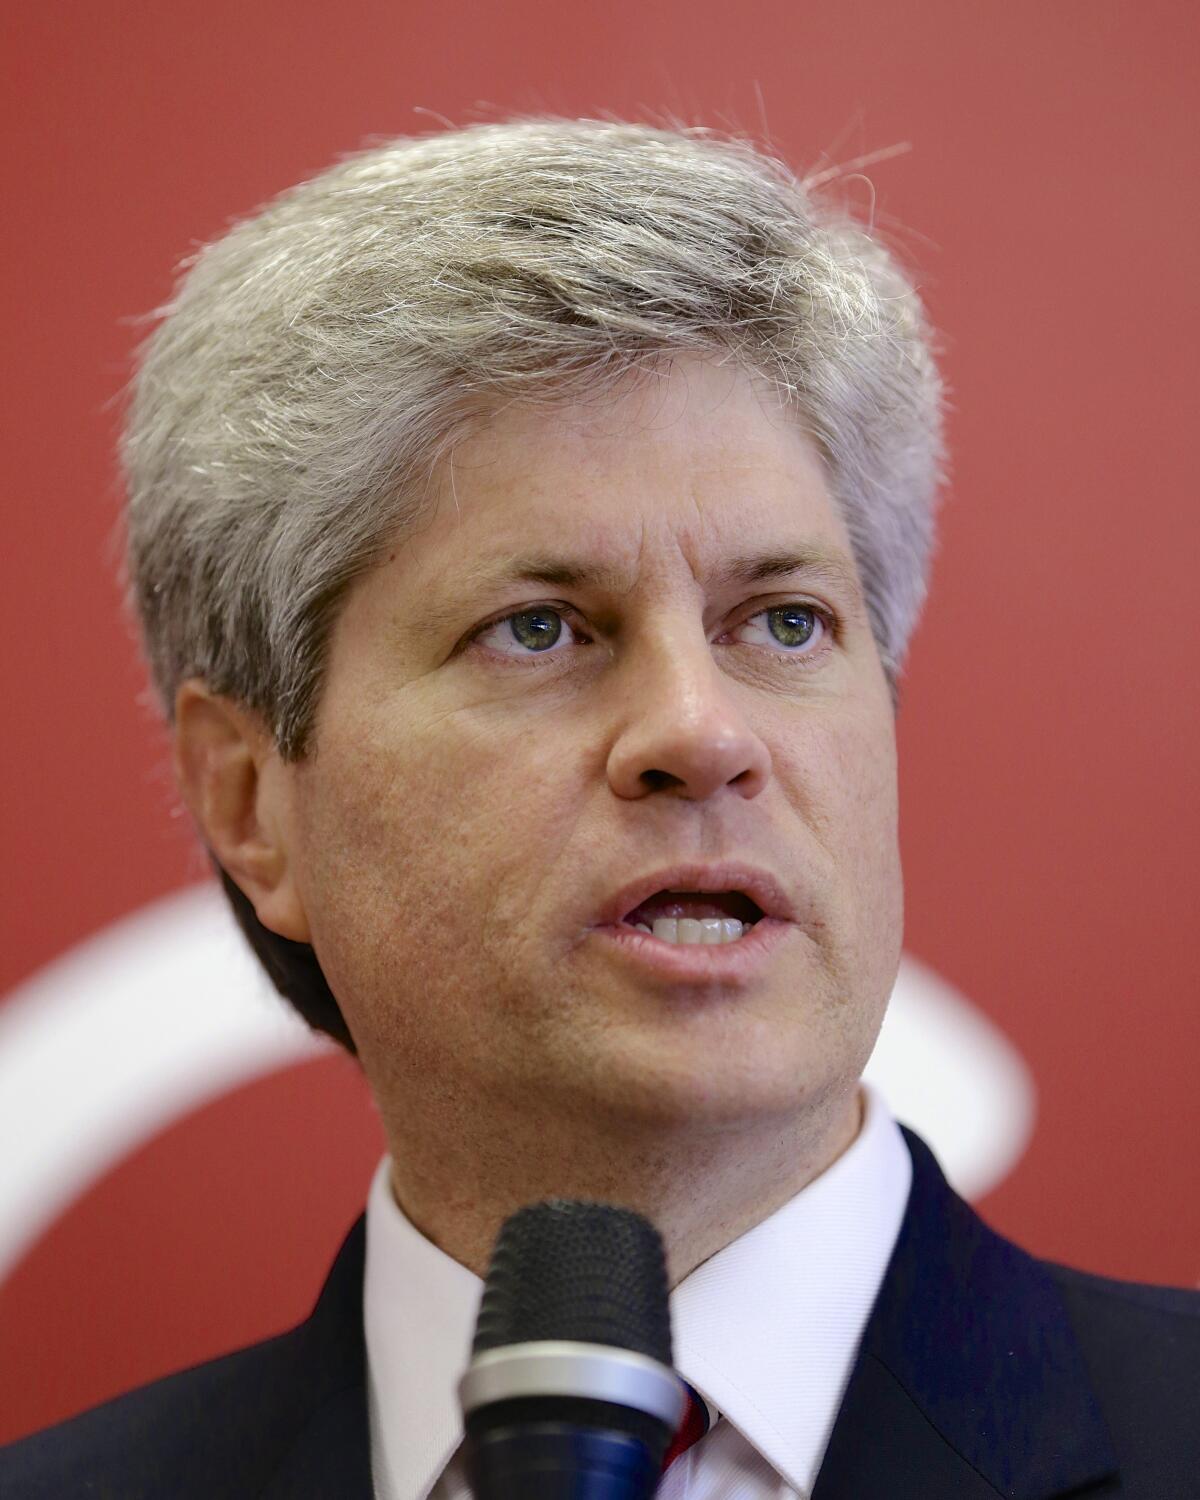 Rep. Jeff Fortenberry speaks into a microphone in a file photo.